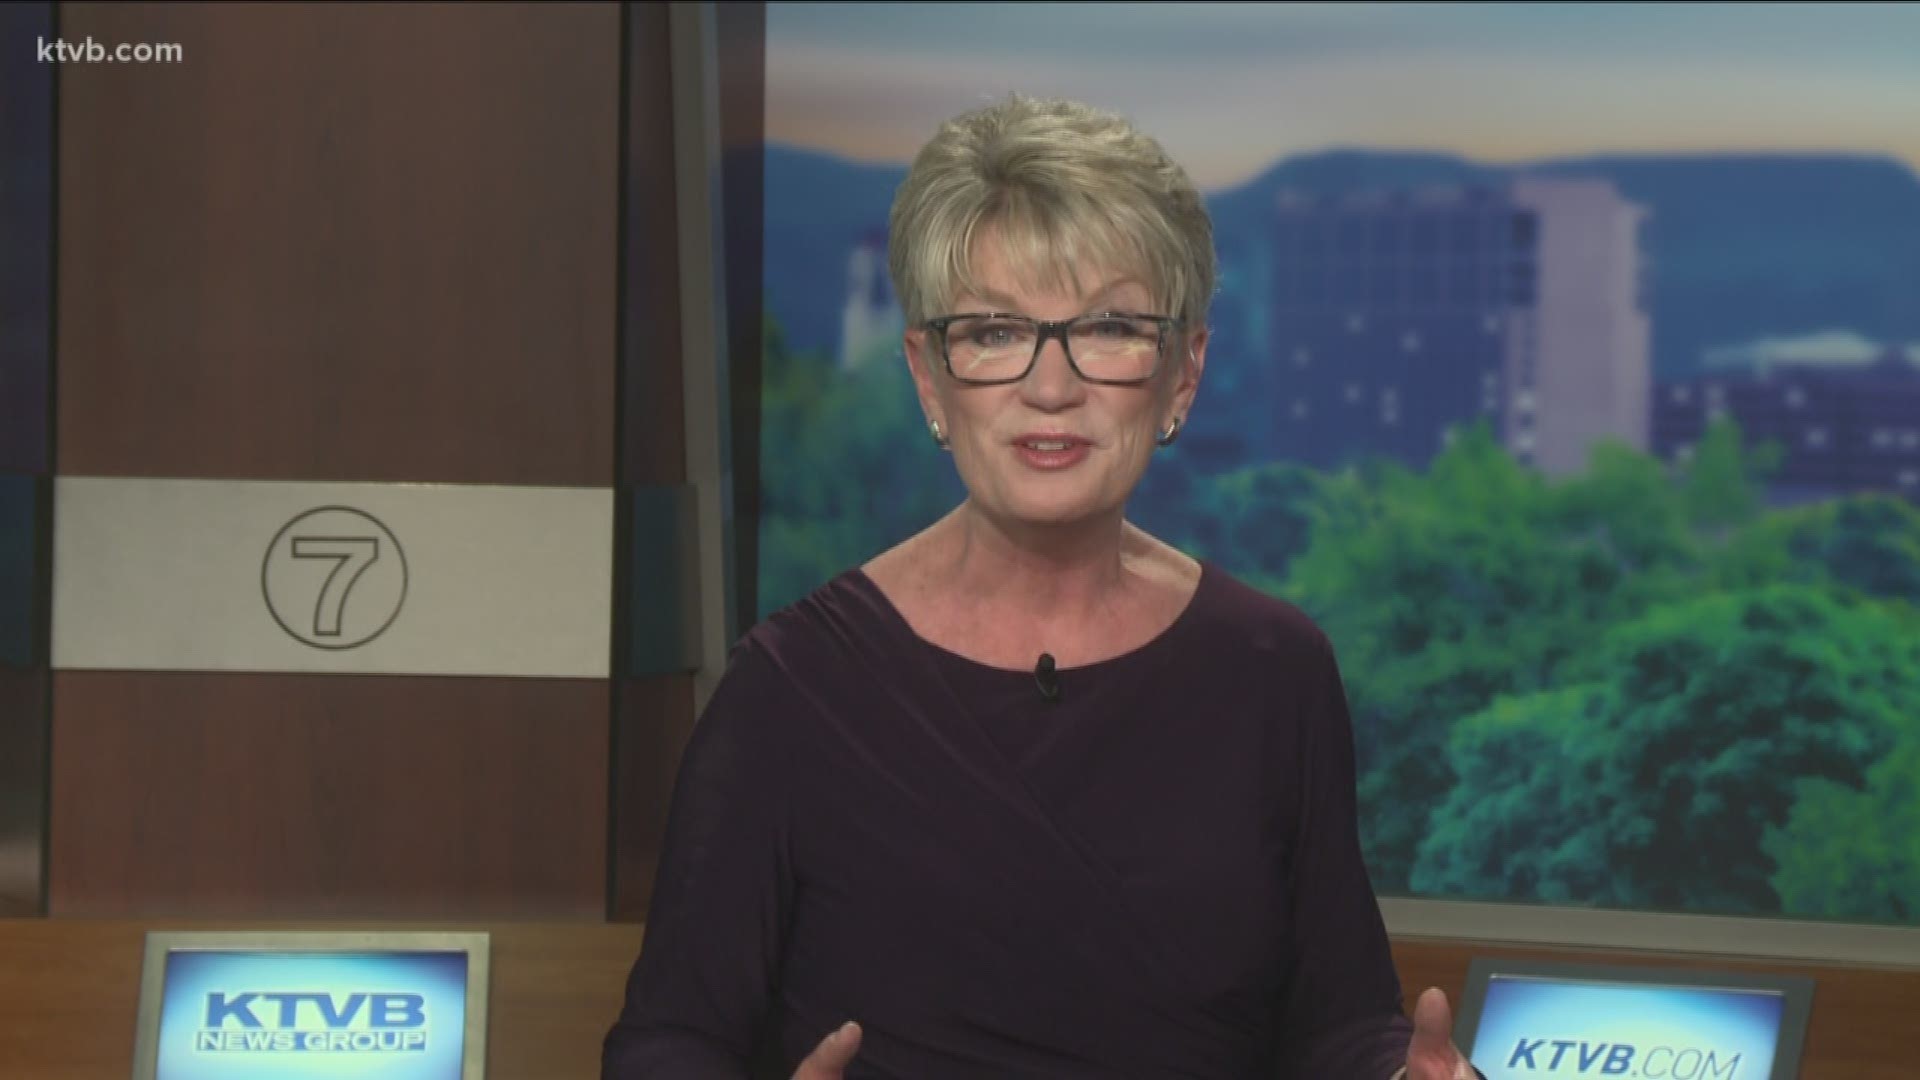 Dee will retire on June 6 after 40 years in TV broadcasting.